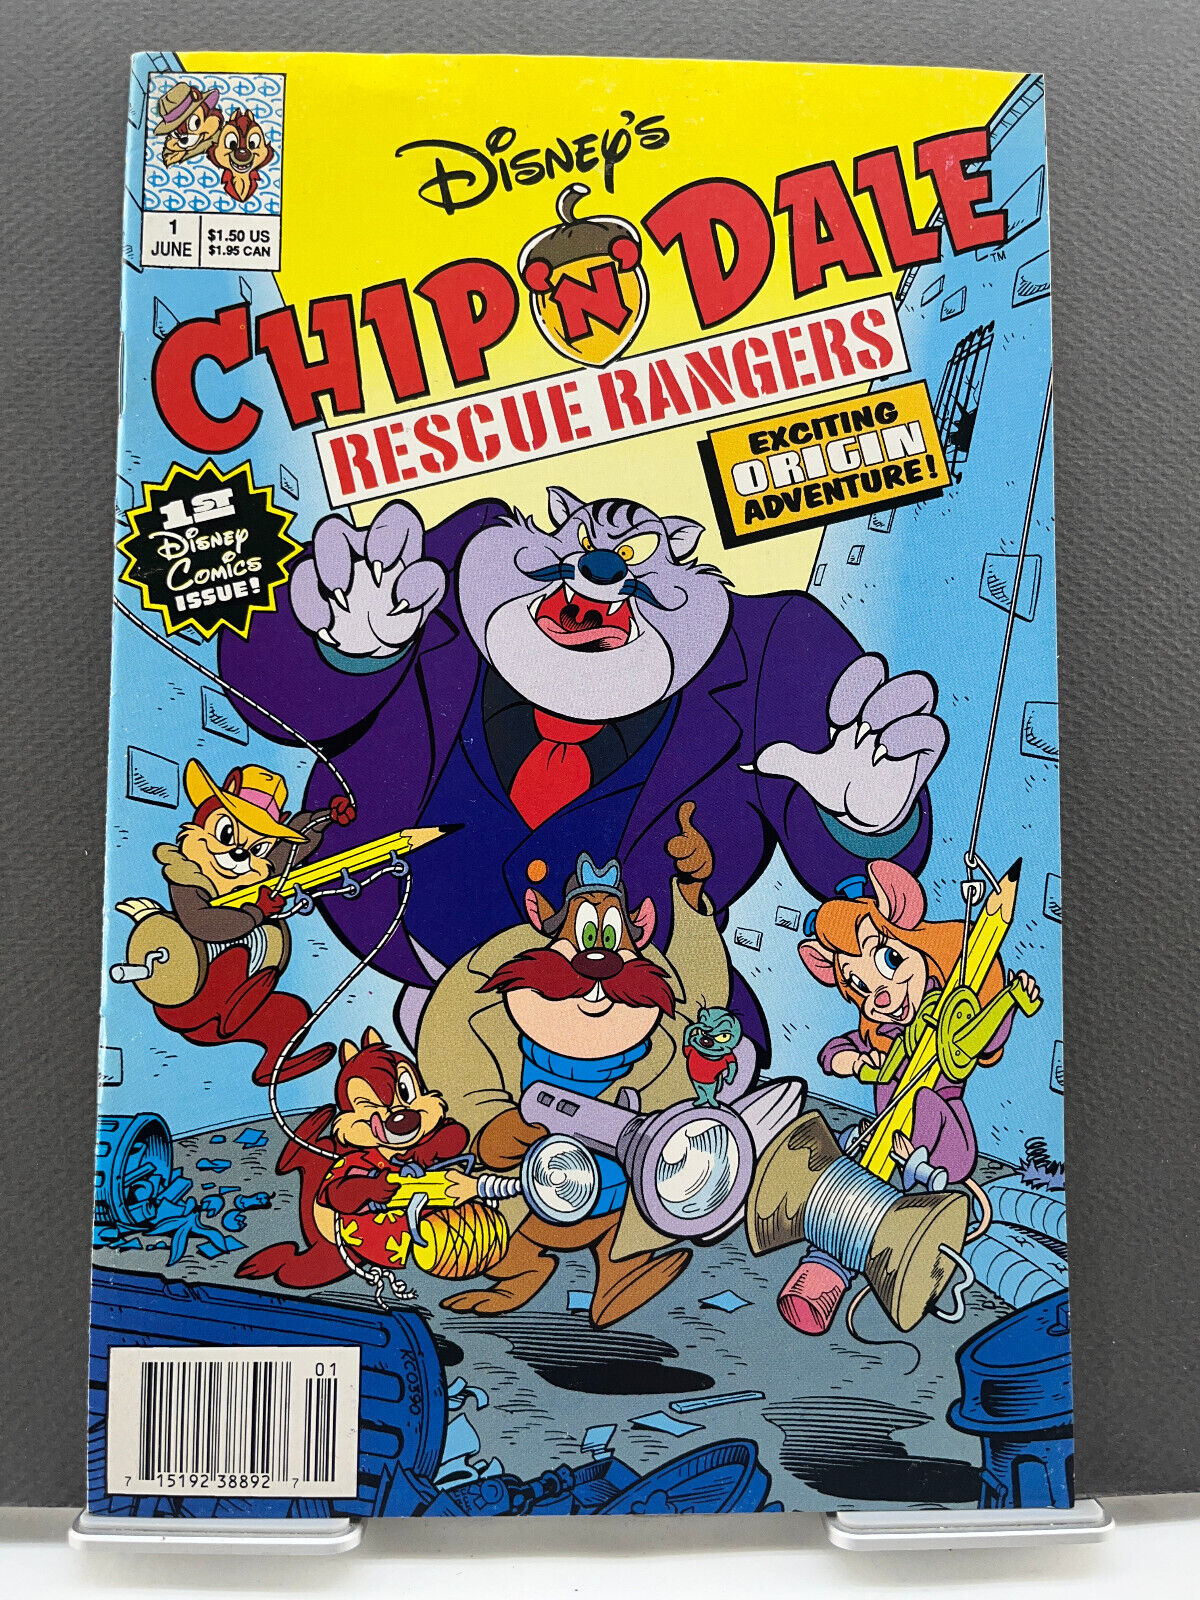 Chip 'n' Dale Rescue Rangers #1 Disney 1990 8.0 Very fine Newstand